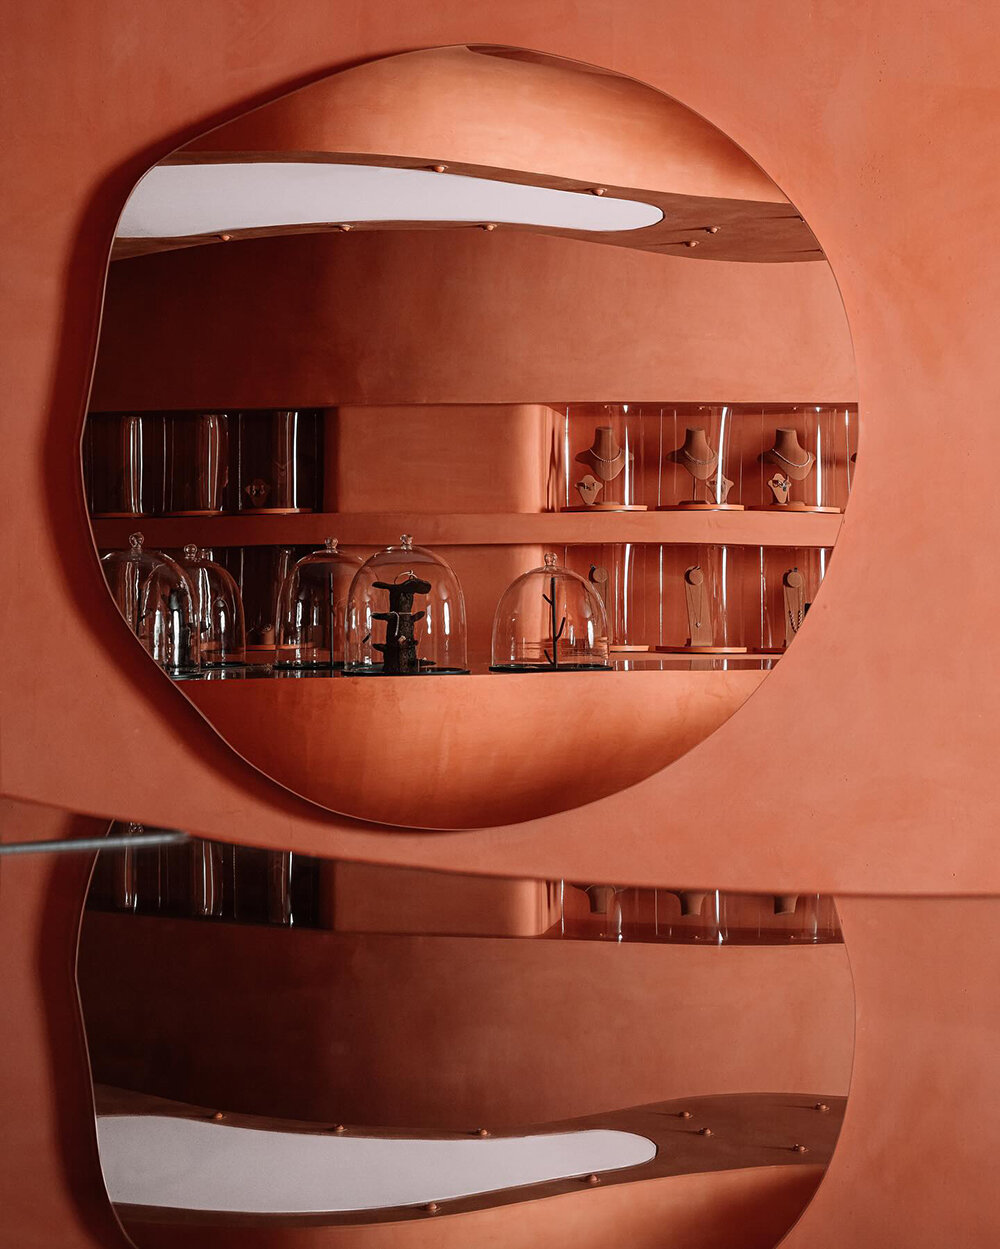 museLAB's jewelry store in ahmedabad recalls a voluptuous terracotta landscape